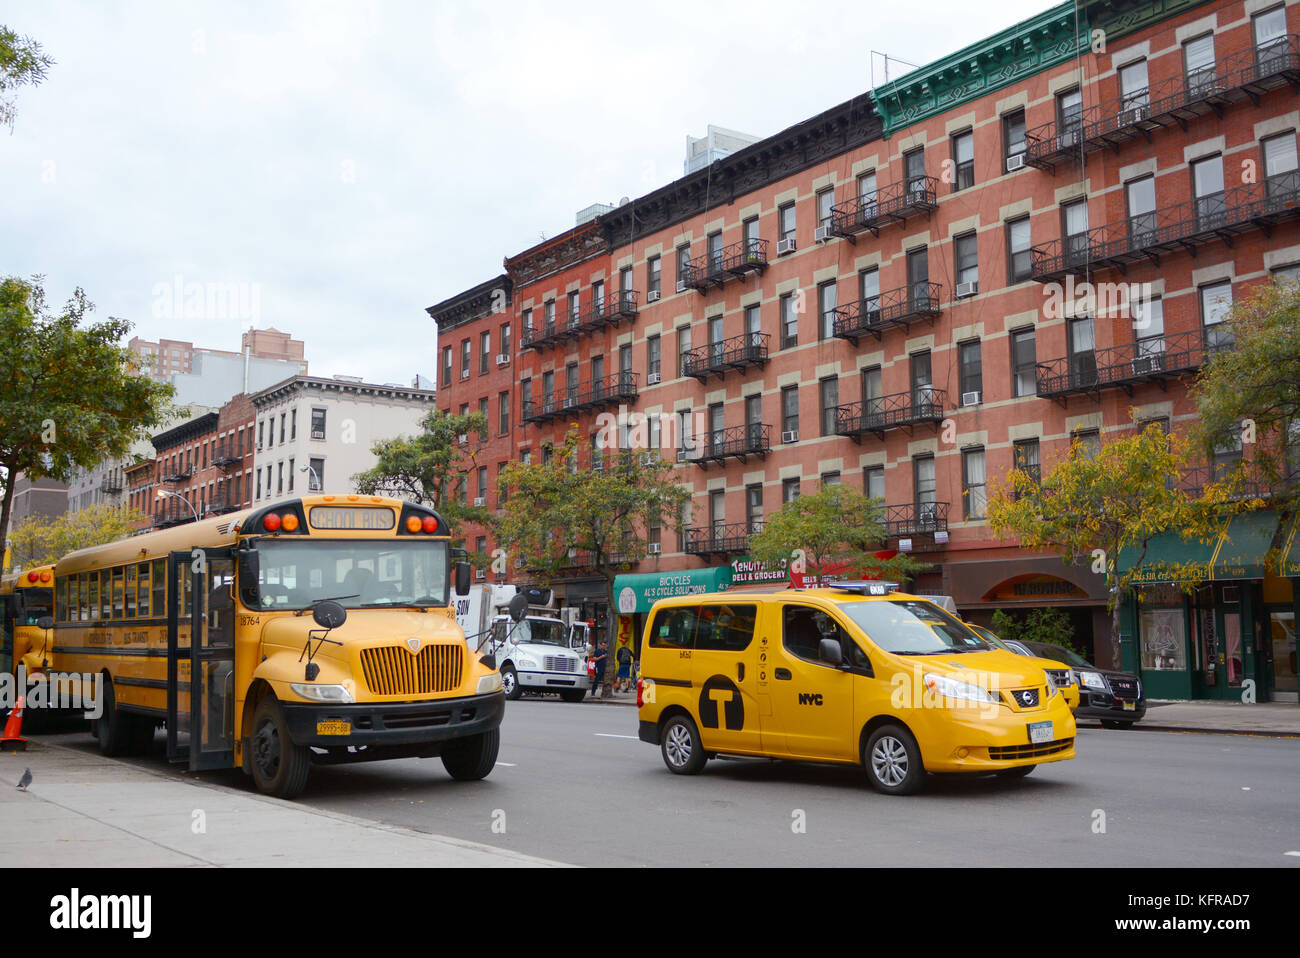 NEW YORK - OCTOBER 23, 2017: Yellow school bus and NYC taxi cab on 10th Avenue in Manhattan. Both are iconic American vehicles seen on the city street Stock Photo